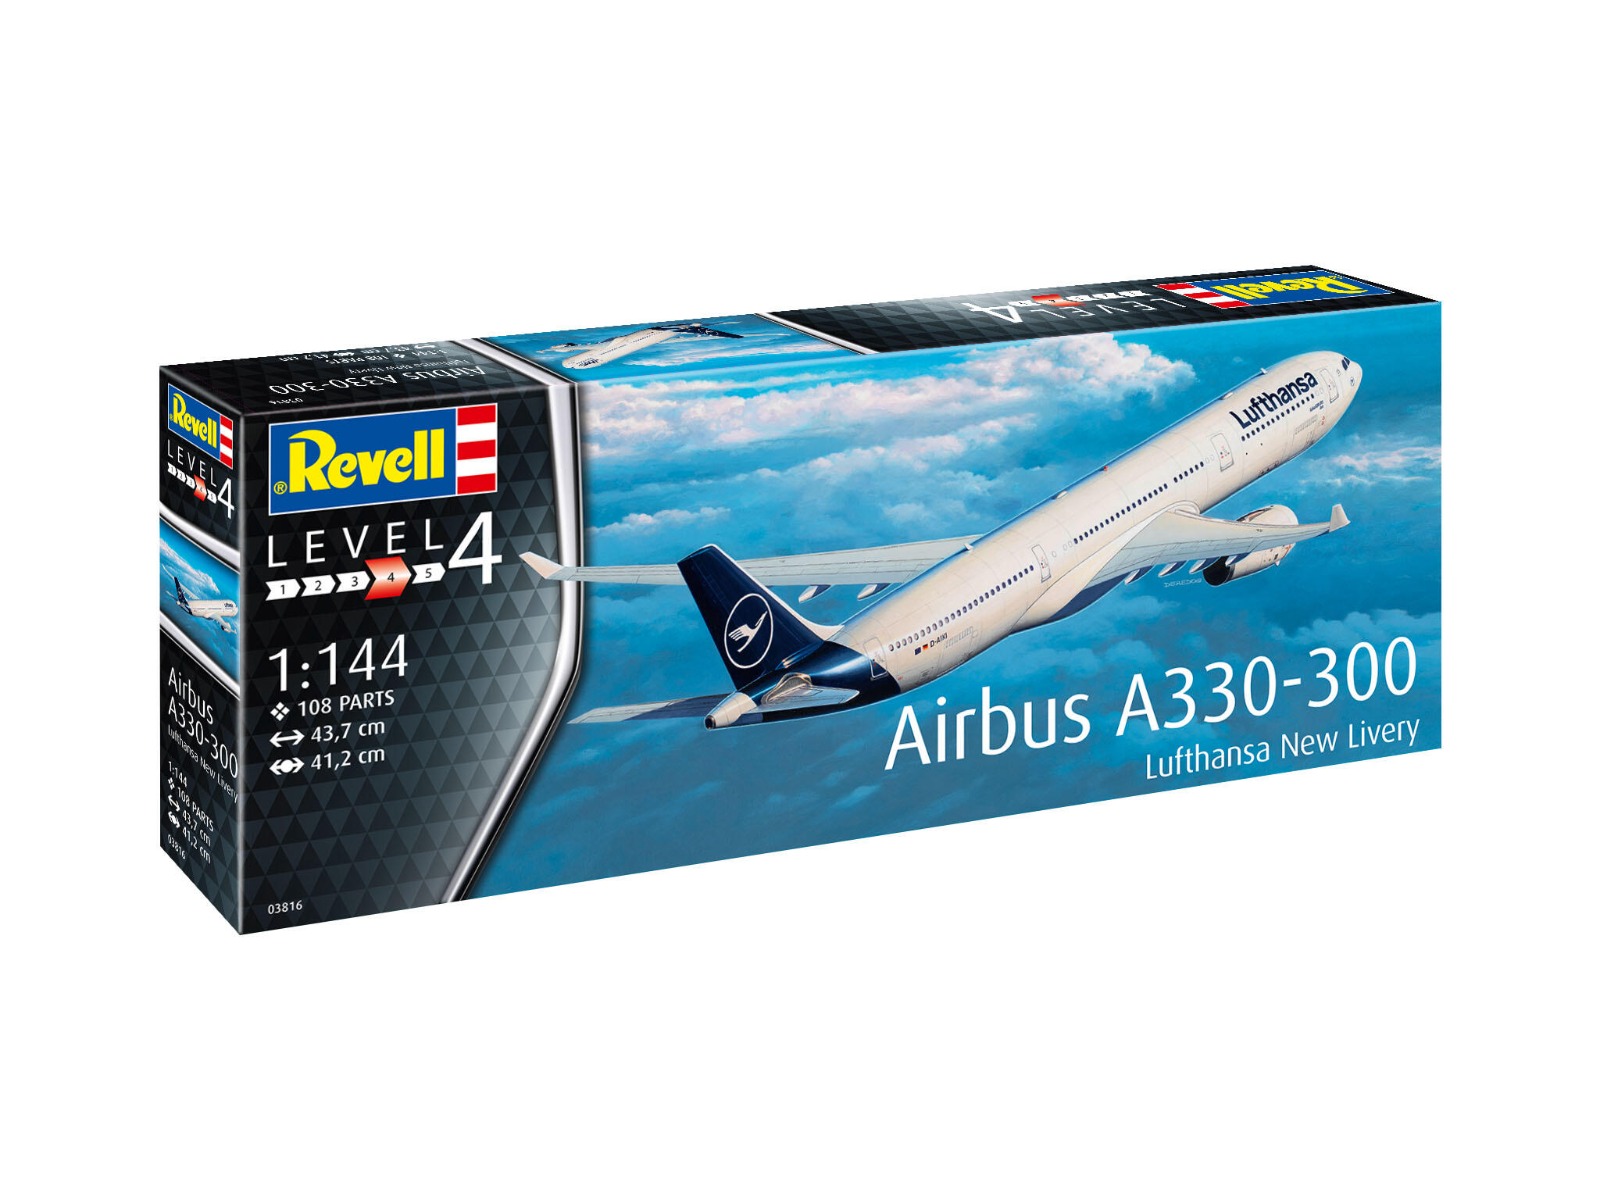 Revell 1/144 Airbus A330-300 Lufthansa New Livery